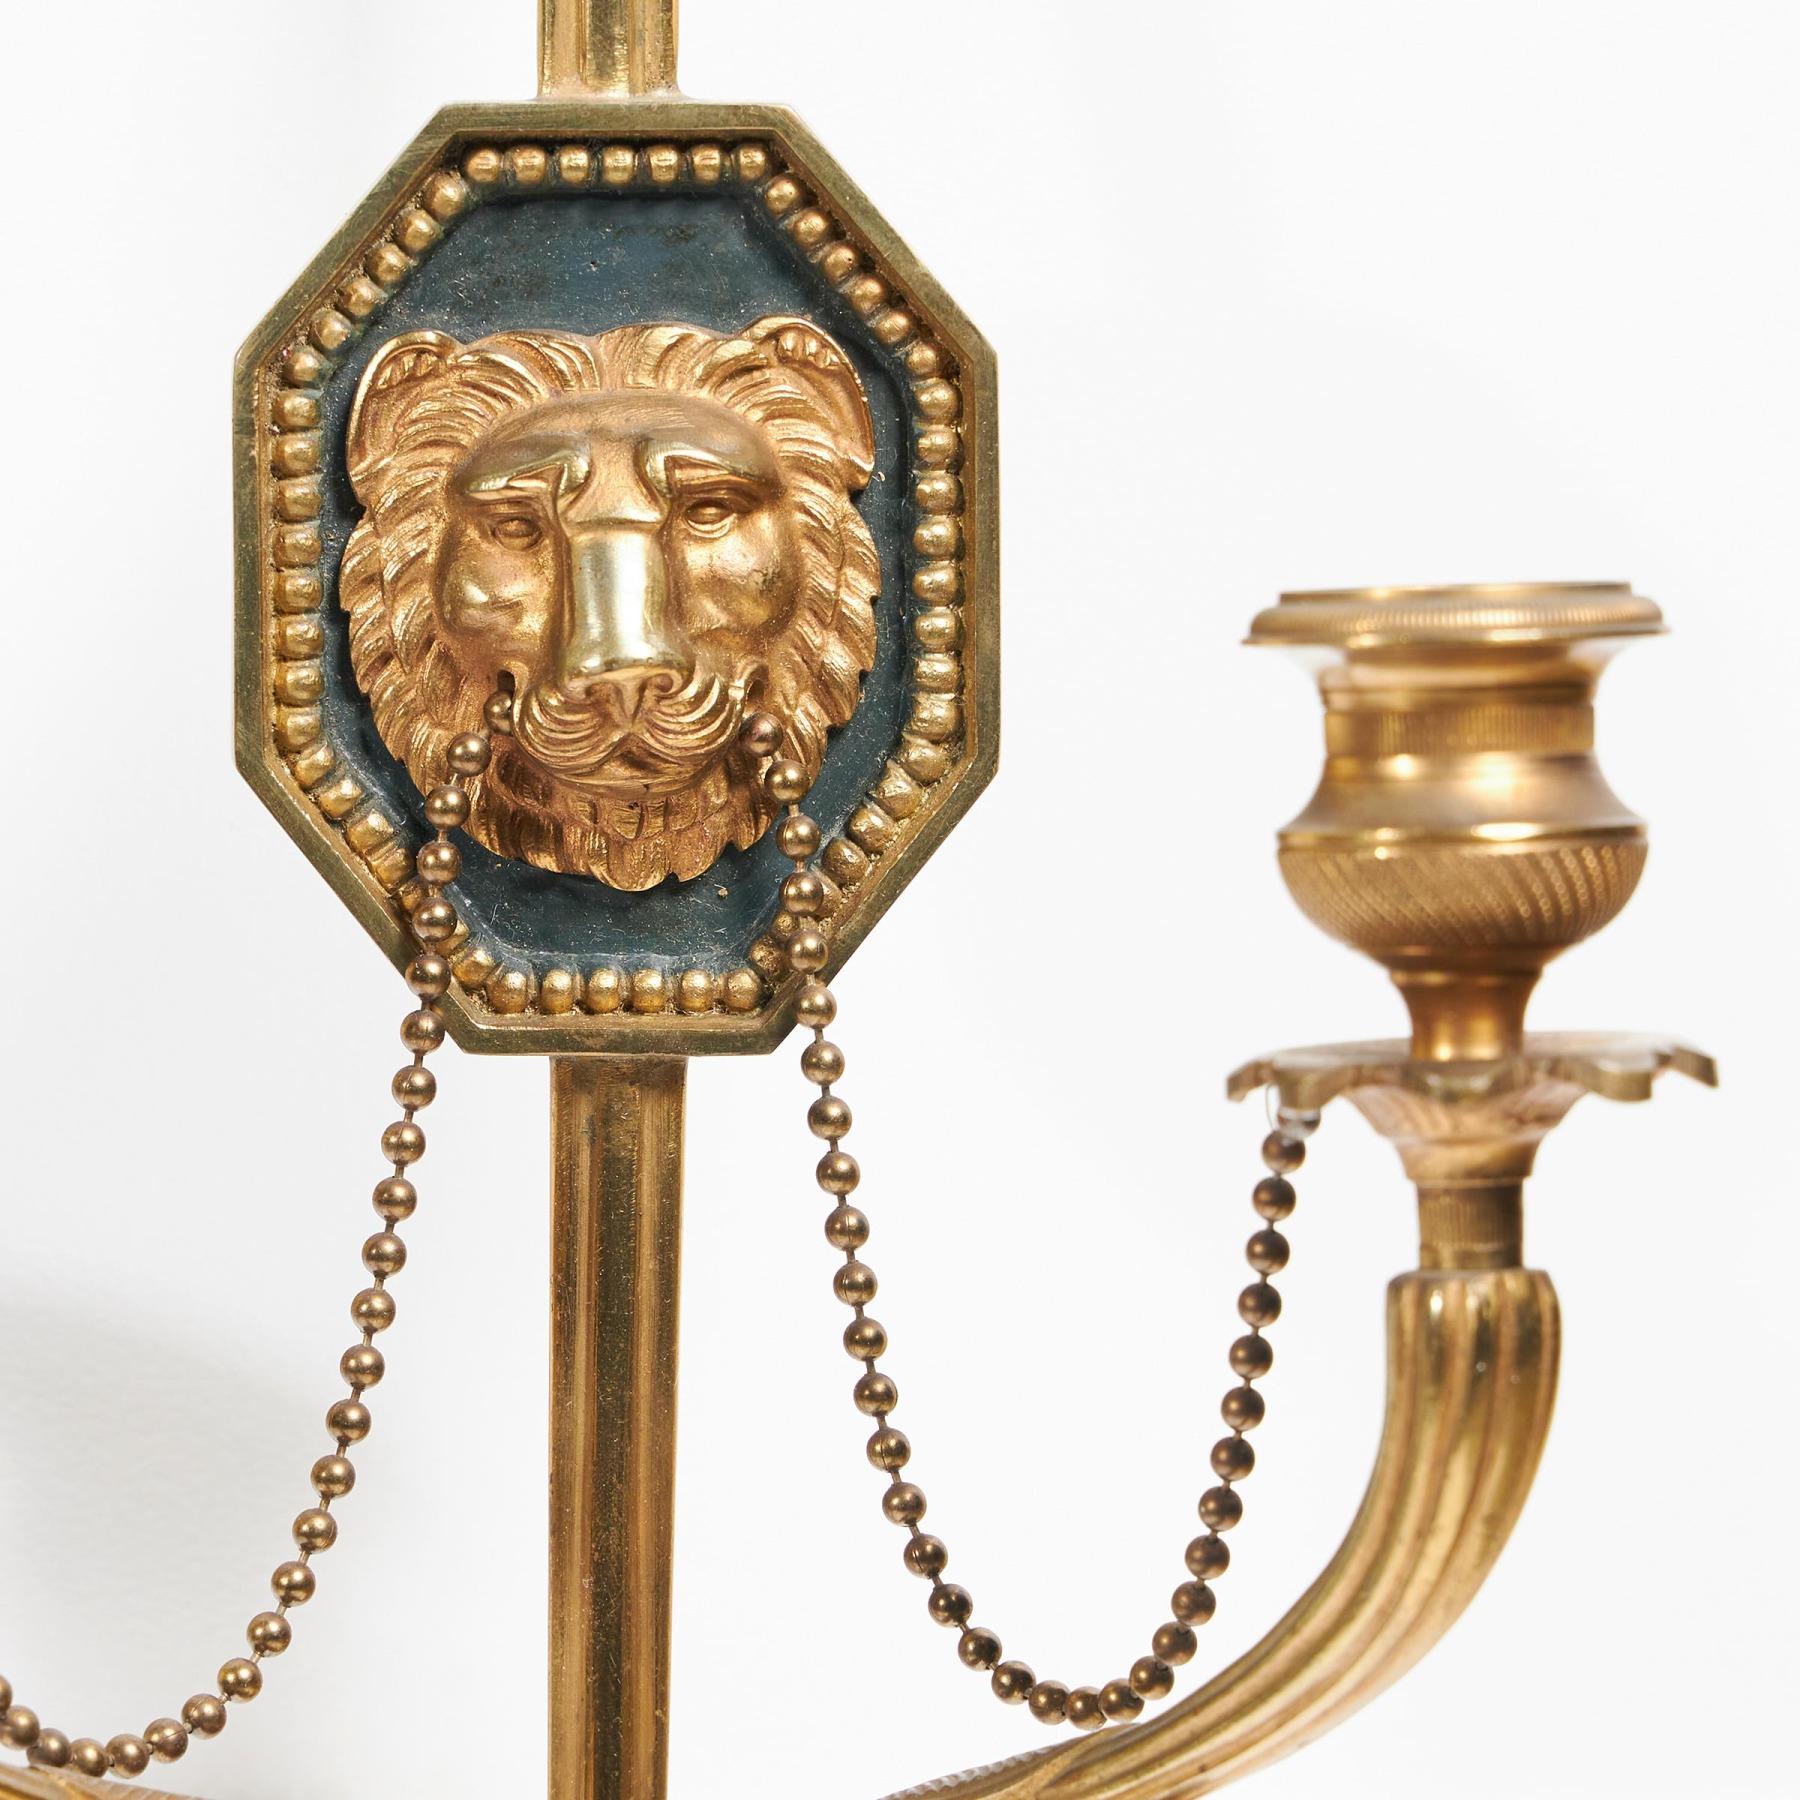 Fine Set of Four of Italian Ormolu Wall Lights or Appliques in the French Empire In Good Condition For Sale In Benington, Herts